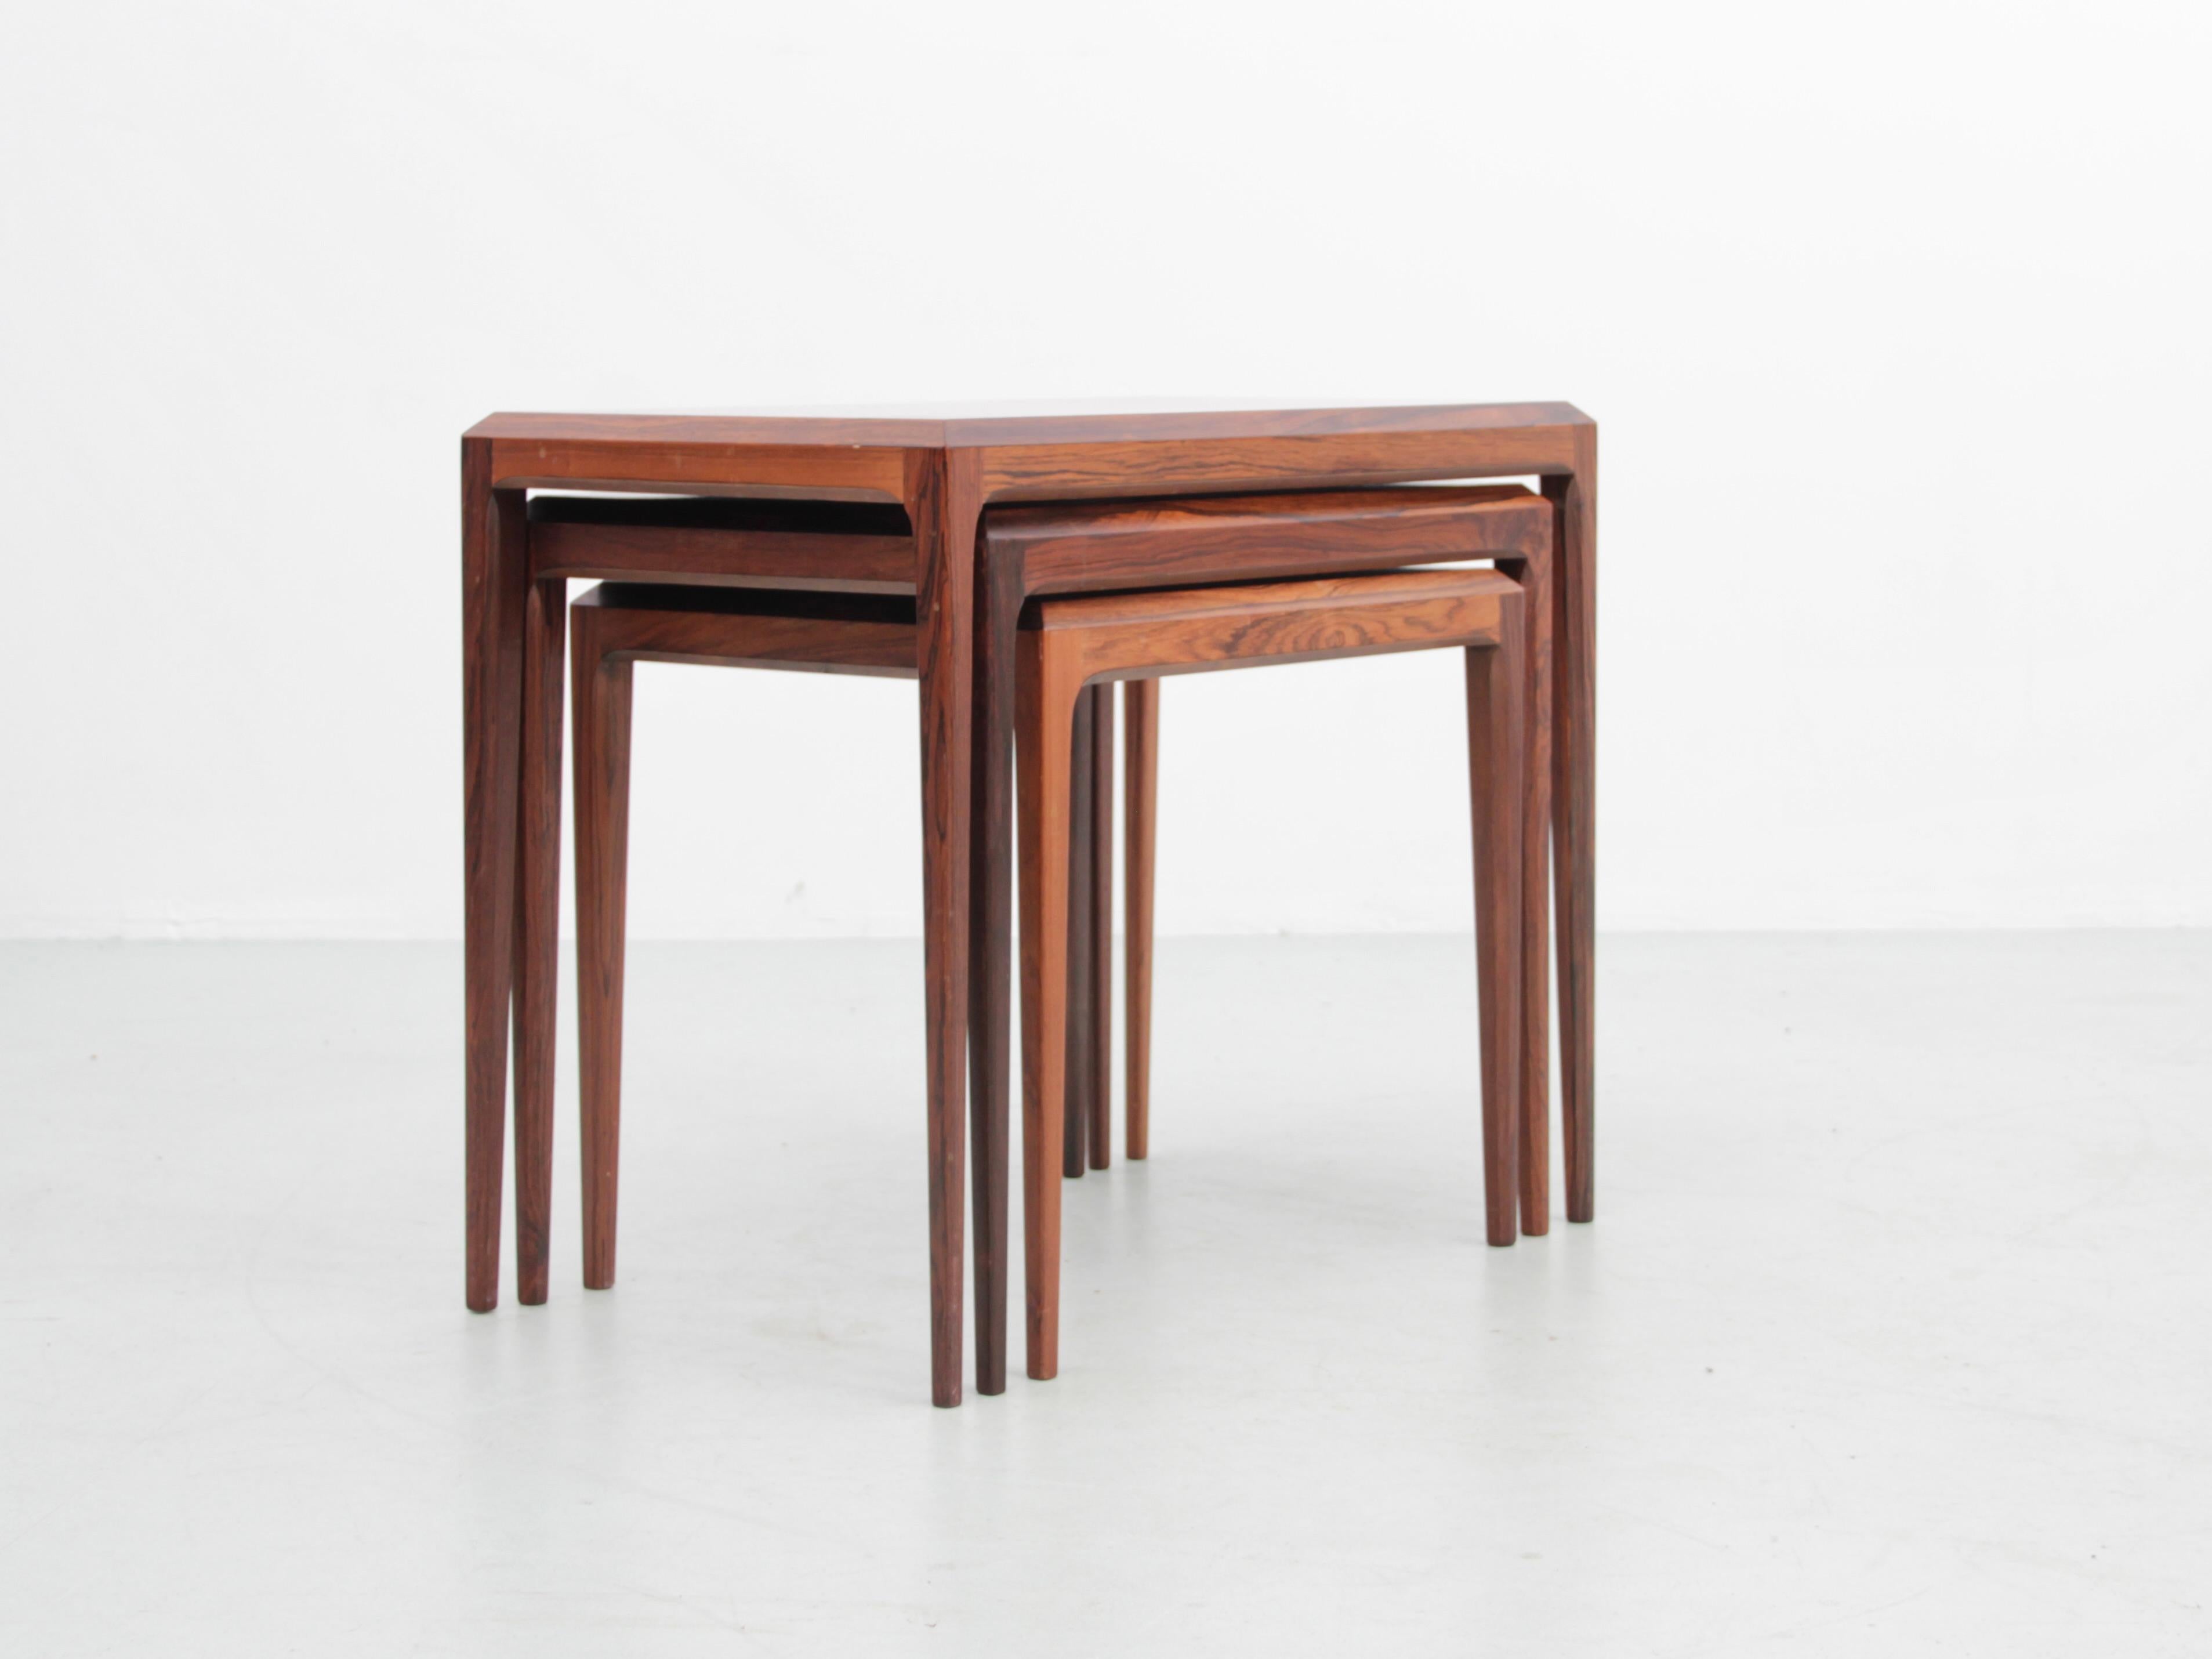 Mid-20th Century Mid-Century Modern Scandinavian Nesting Tables in Rio Rosewood by Johannes Ander For Sale